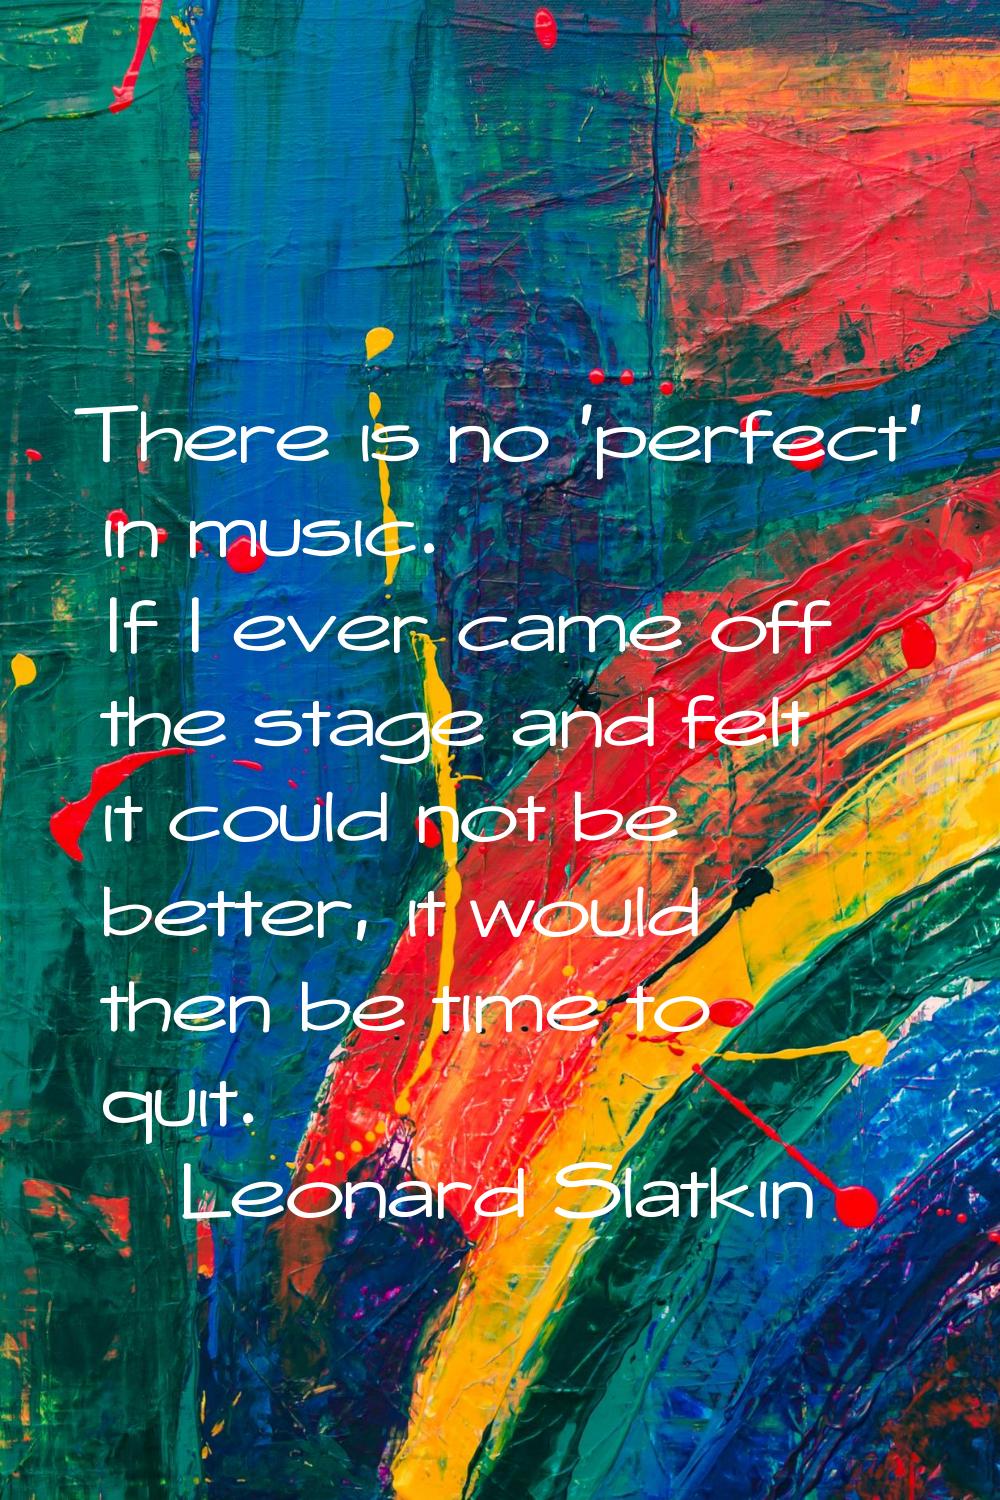 There is no 'perfect' in music. If I ever came off the stage and felt it could not be better, it wo